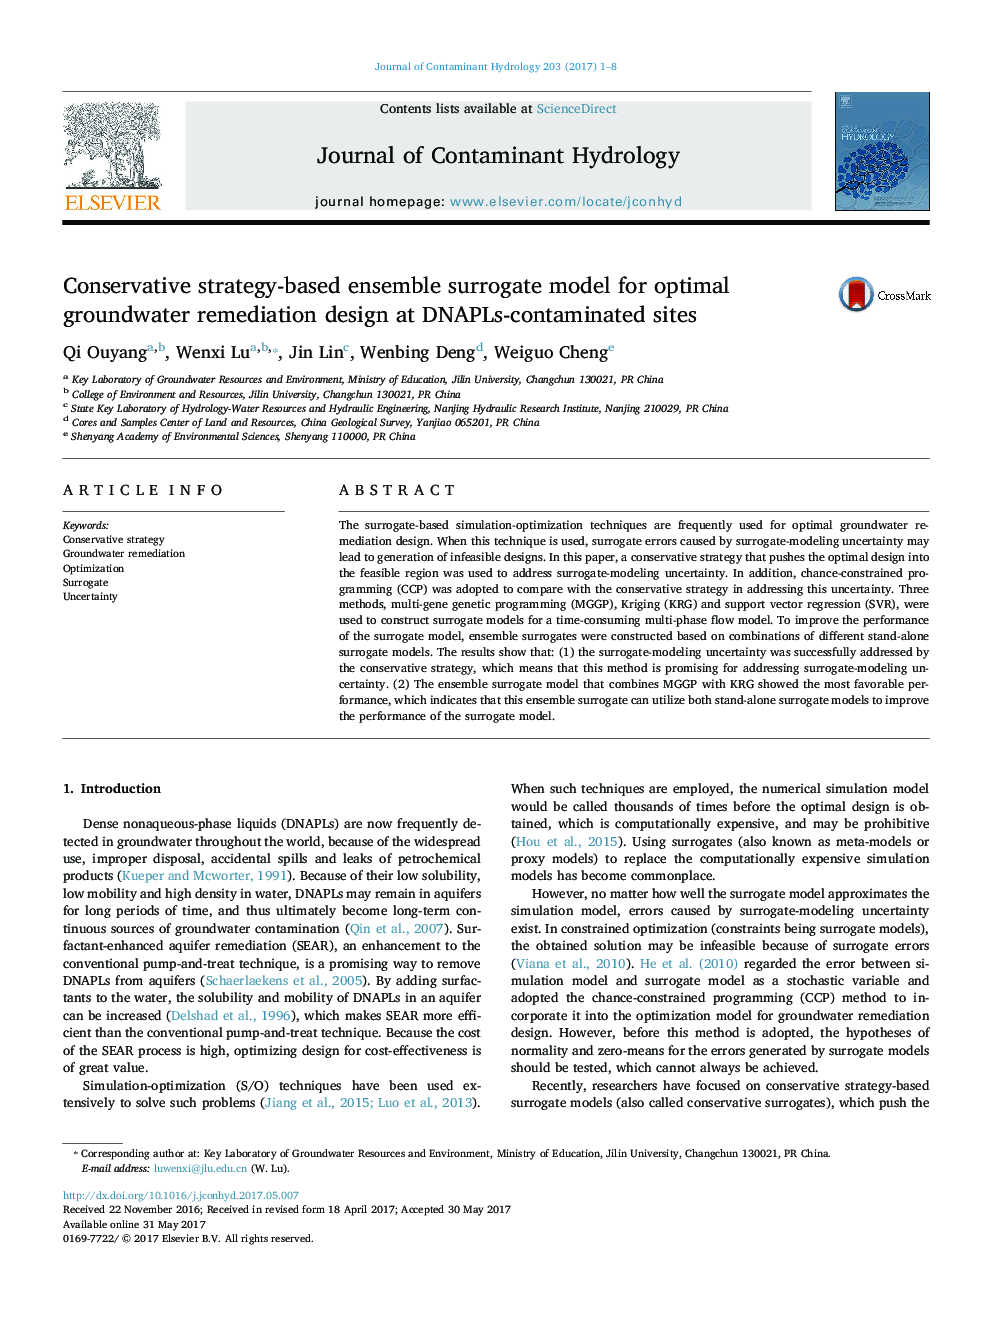 Conservative strategy-based ensemble surrogate model for optimal groundwater remediation design at DNAPLs-contaminated sites